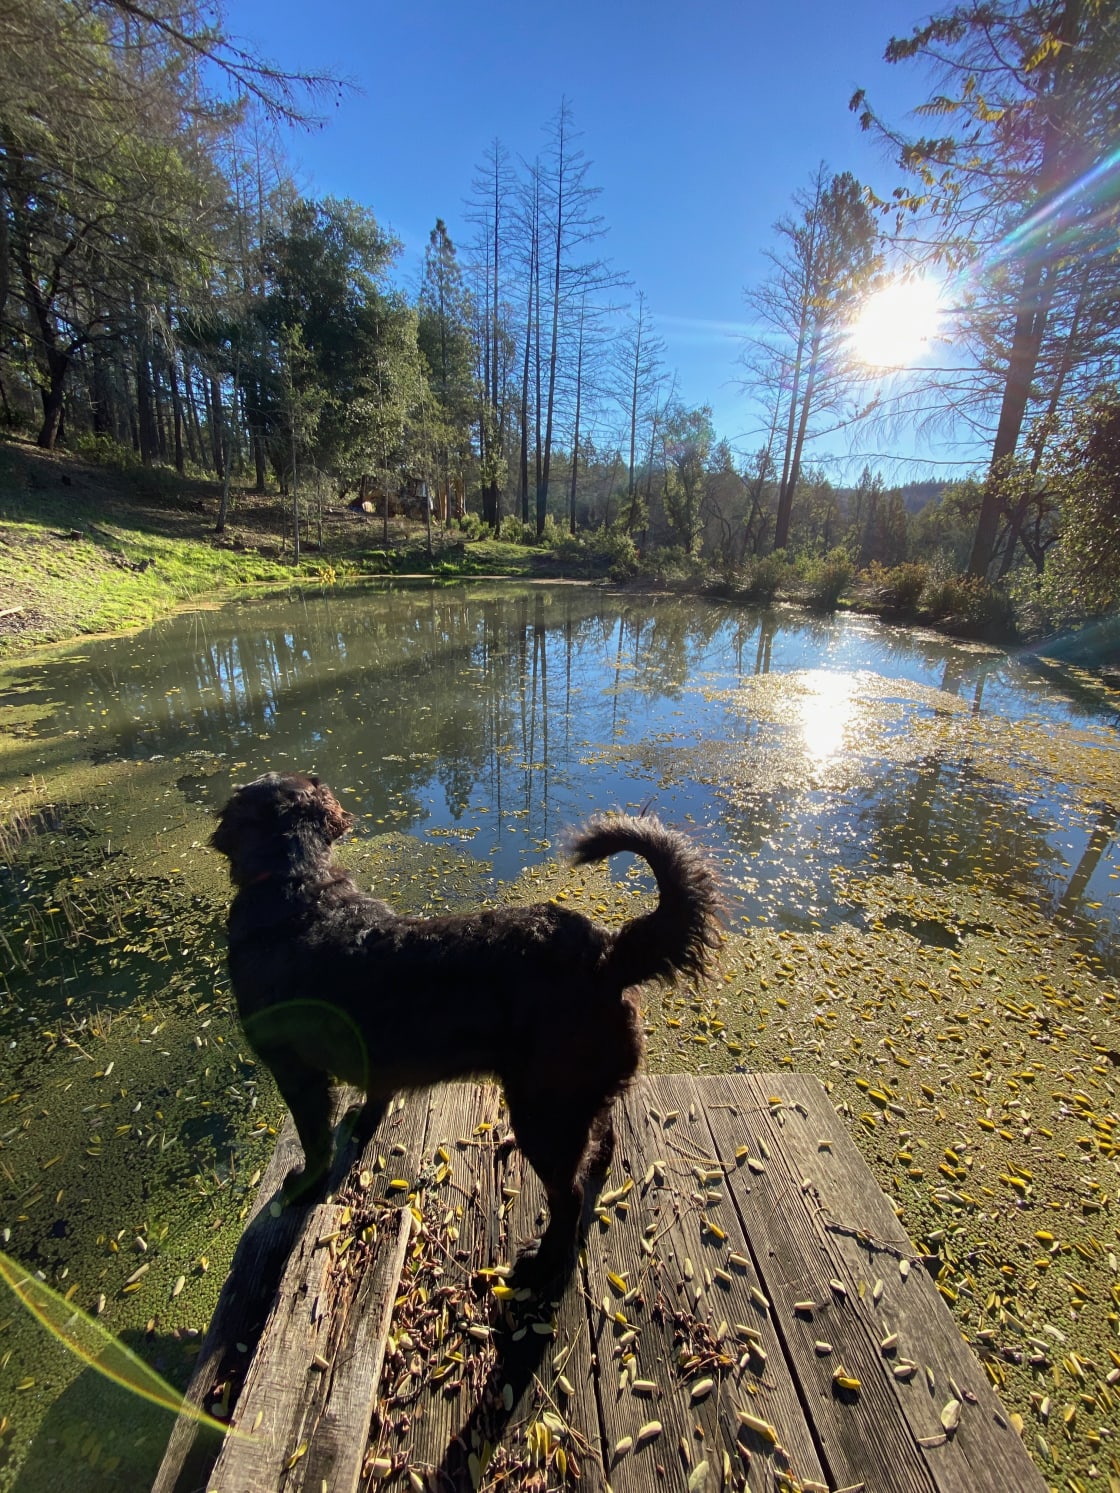 Checking out the pond with Minnie